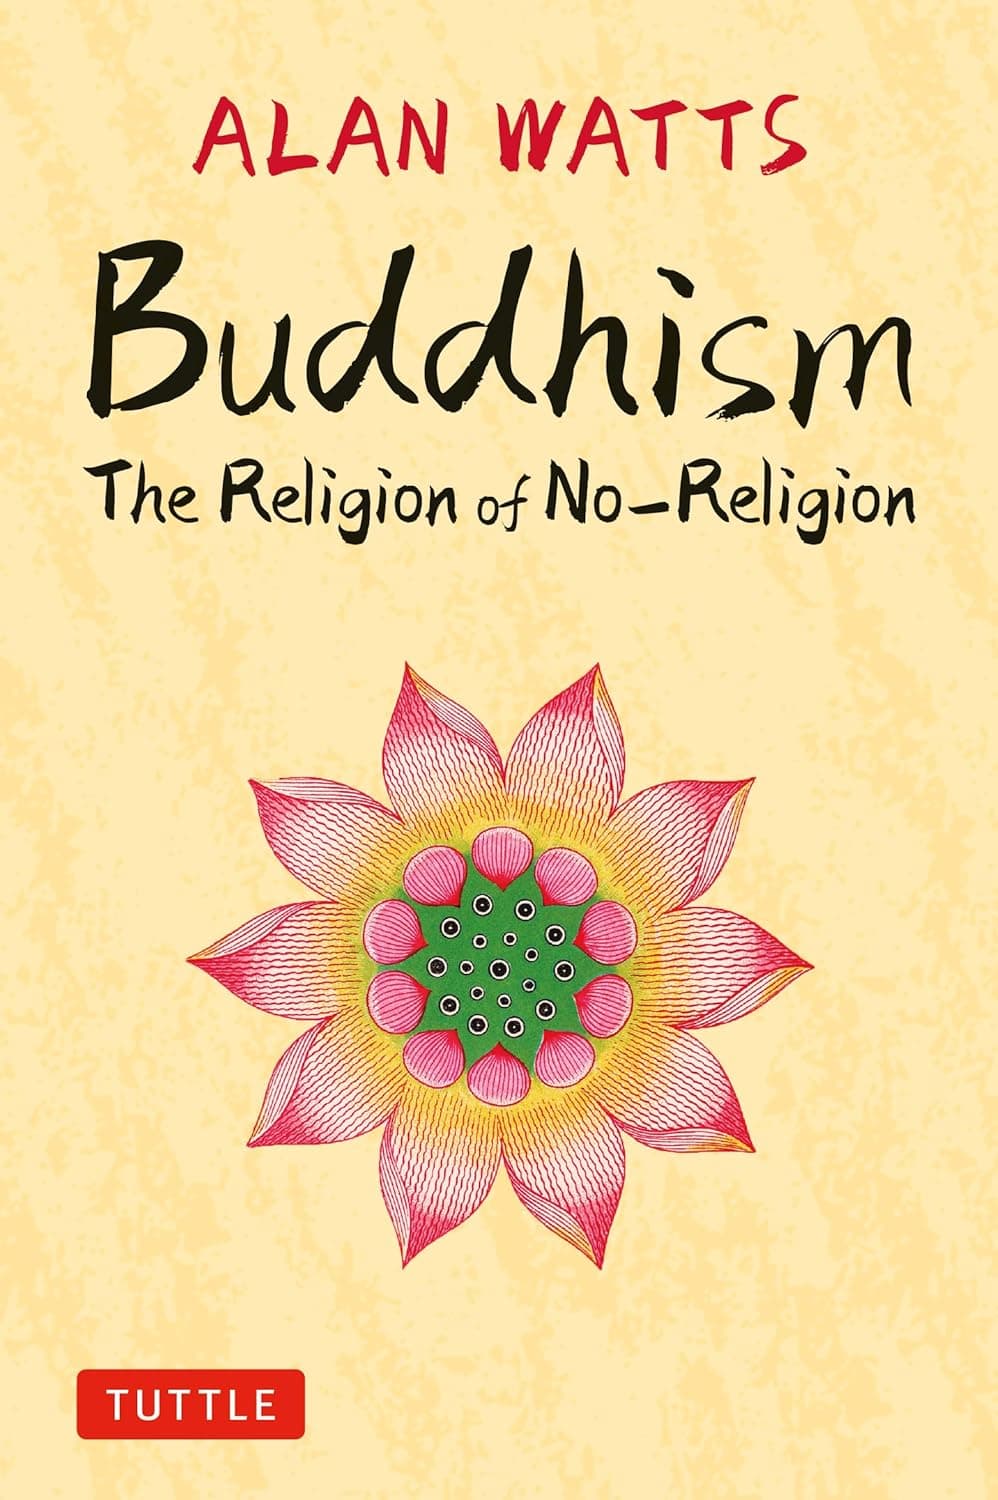 Buddhism The Religion of No-Religion Revised and Expanded Edition – Alan Watts and Mark Watts